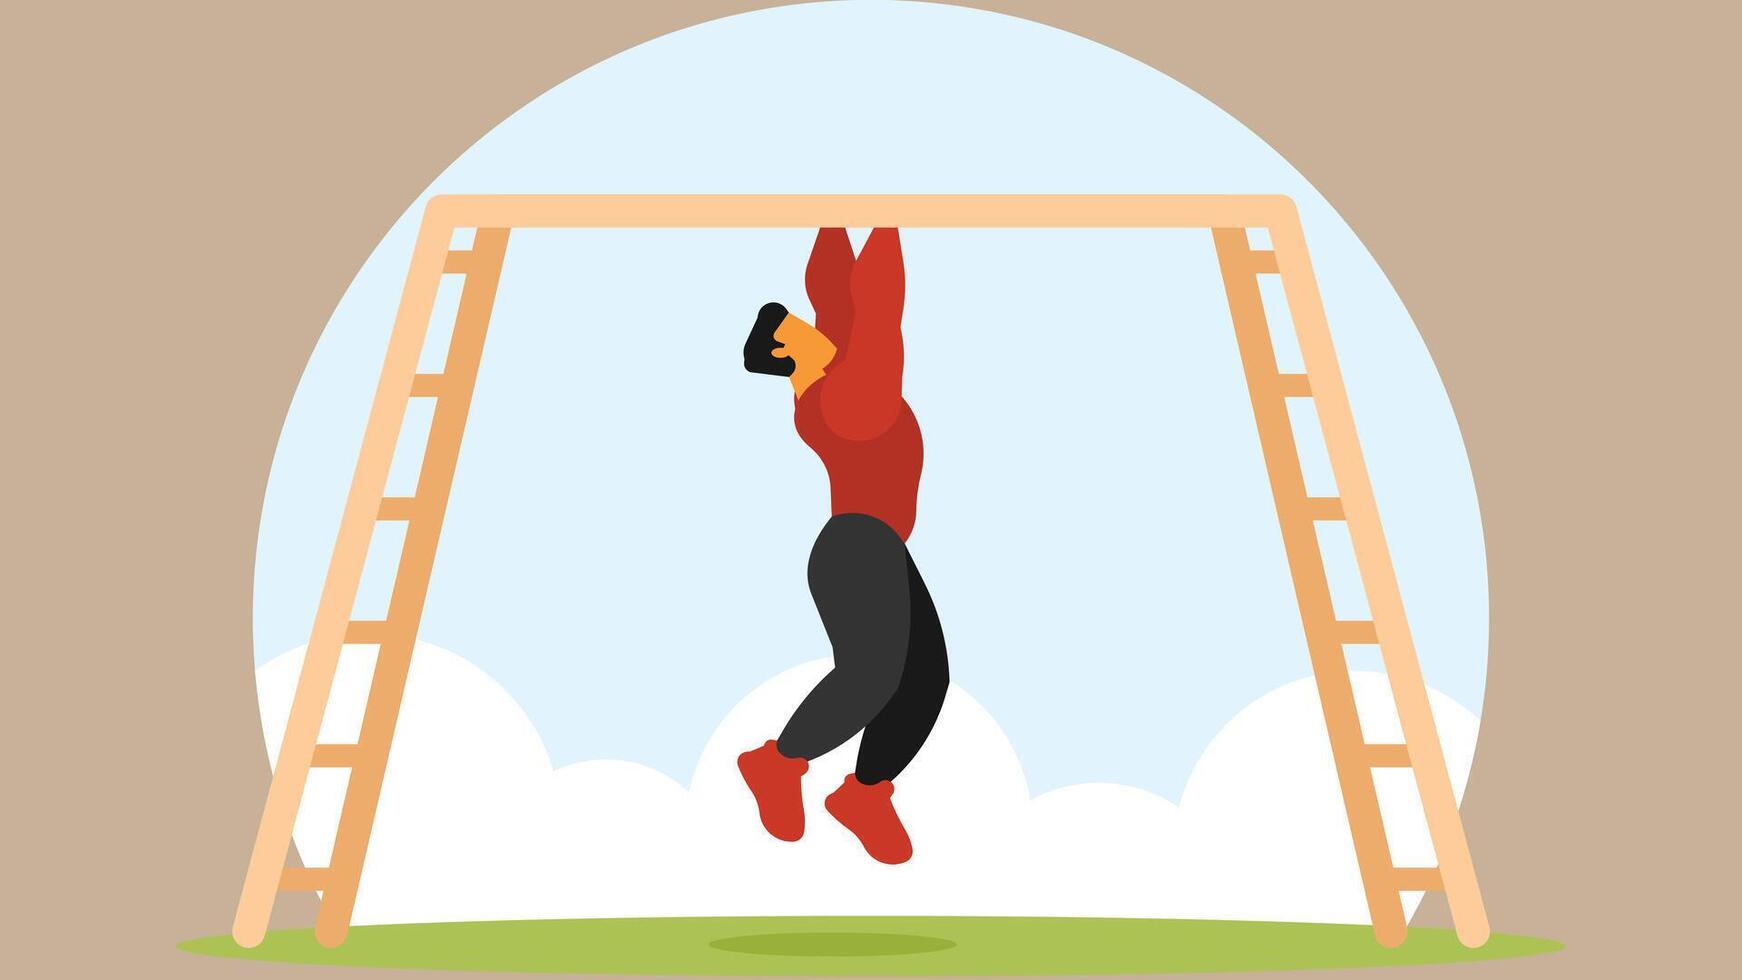 Man Athlete workout and wins a competition vector illustration